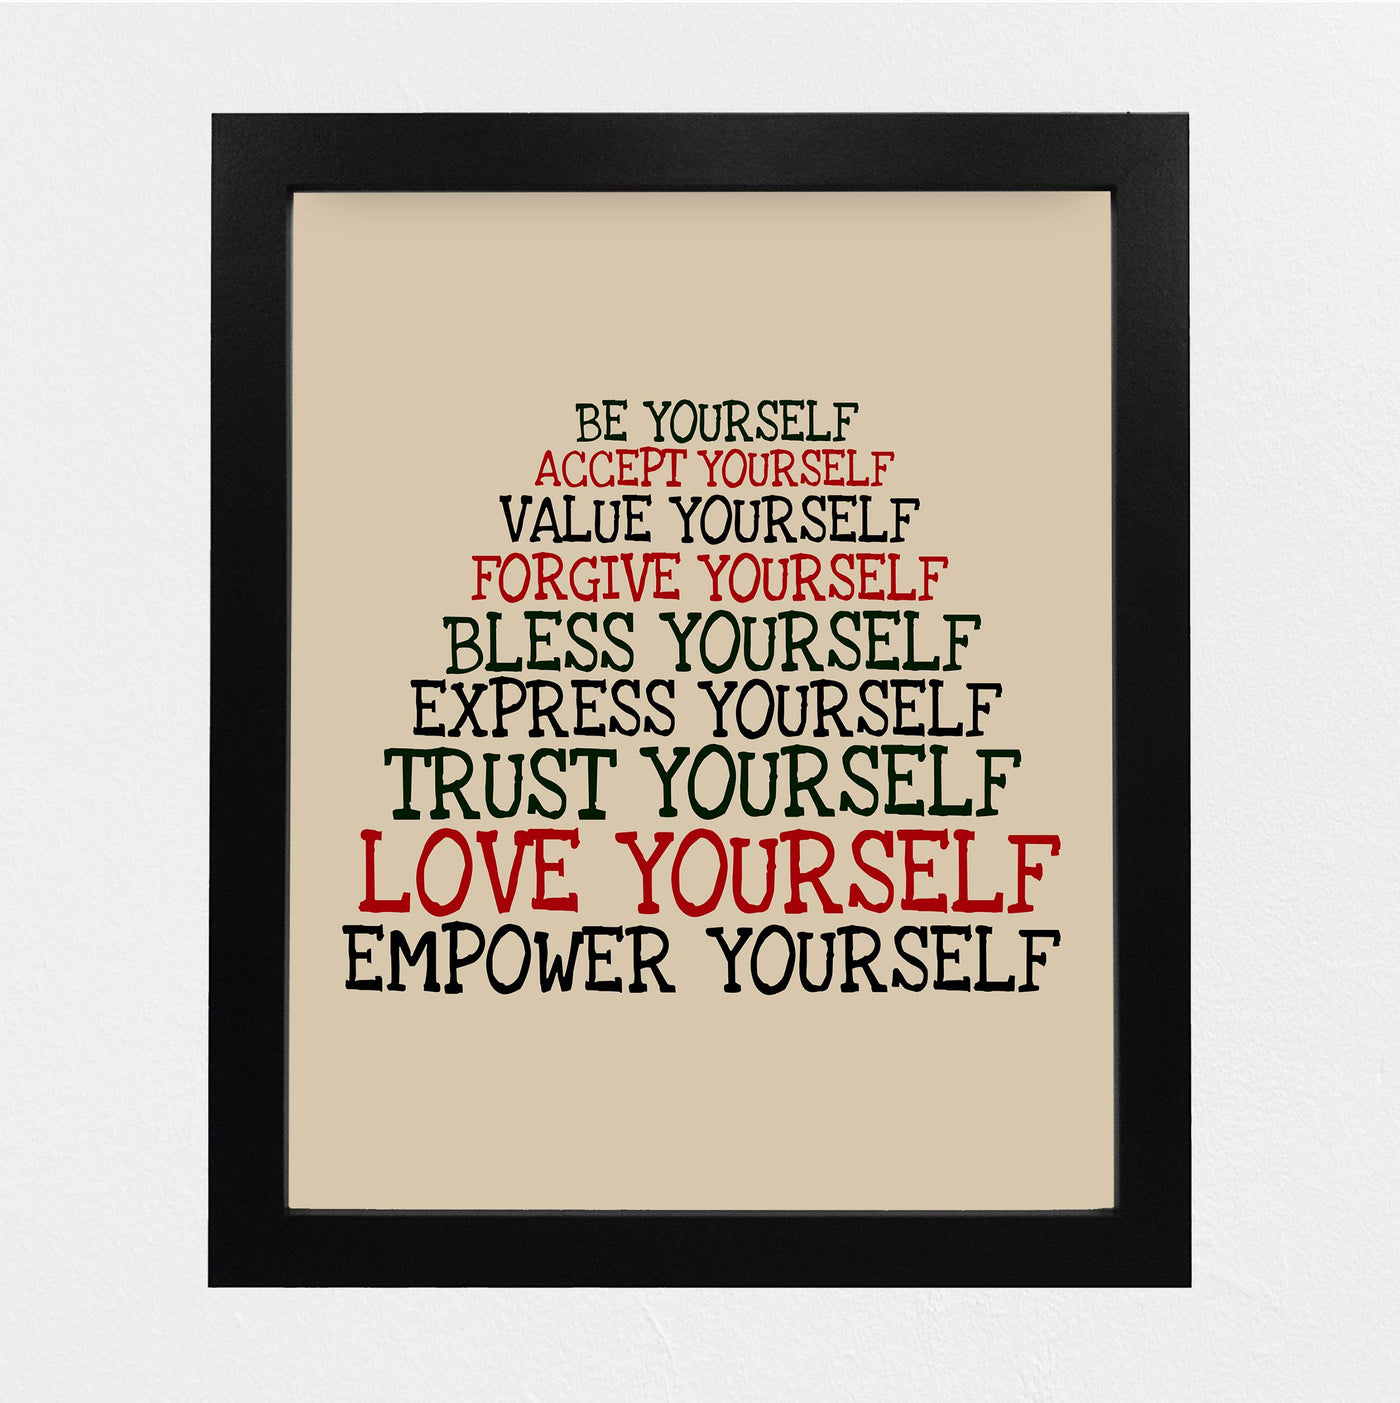 Accept-Forgive-Love Yourself Inspirational Quotes Wall Sign -8 x 10" Modern Typographic Print-Ready to Frame. Motivational Home-Office-School-Dorm Decor. Great Gift to Inspire Self-Confidence!